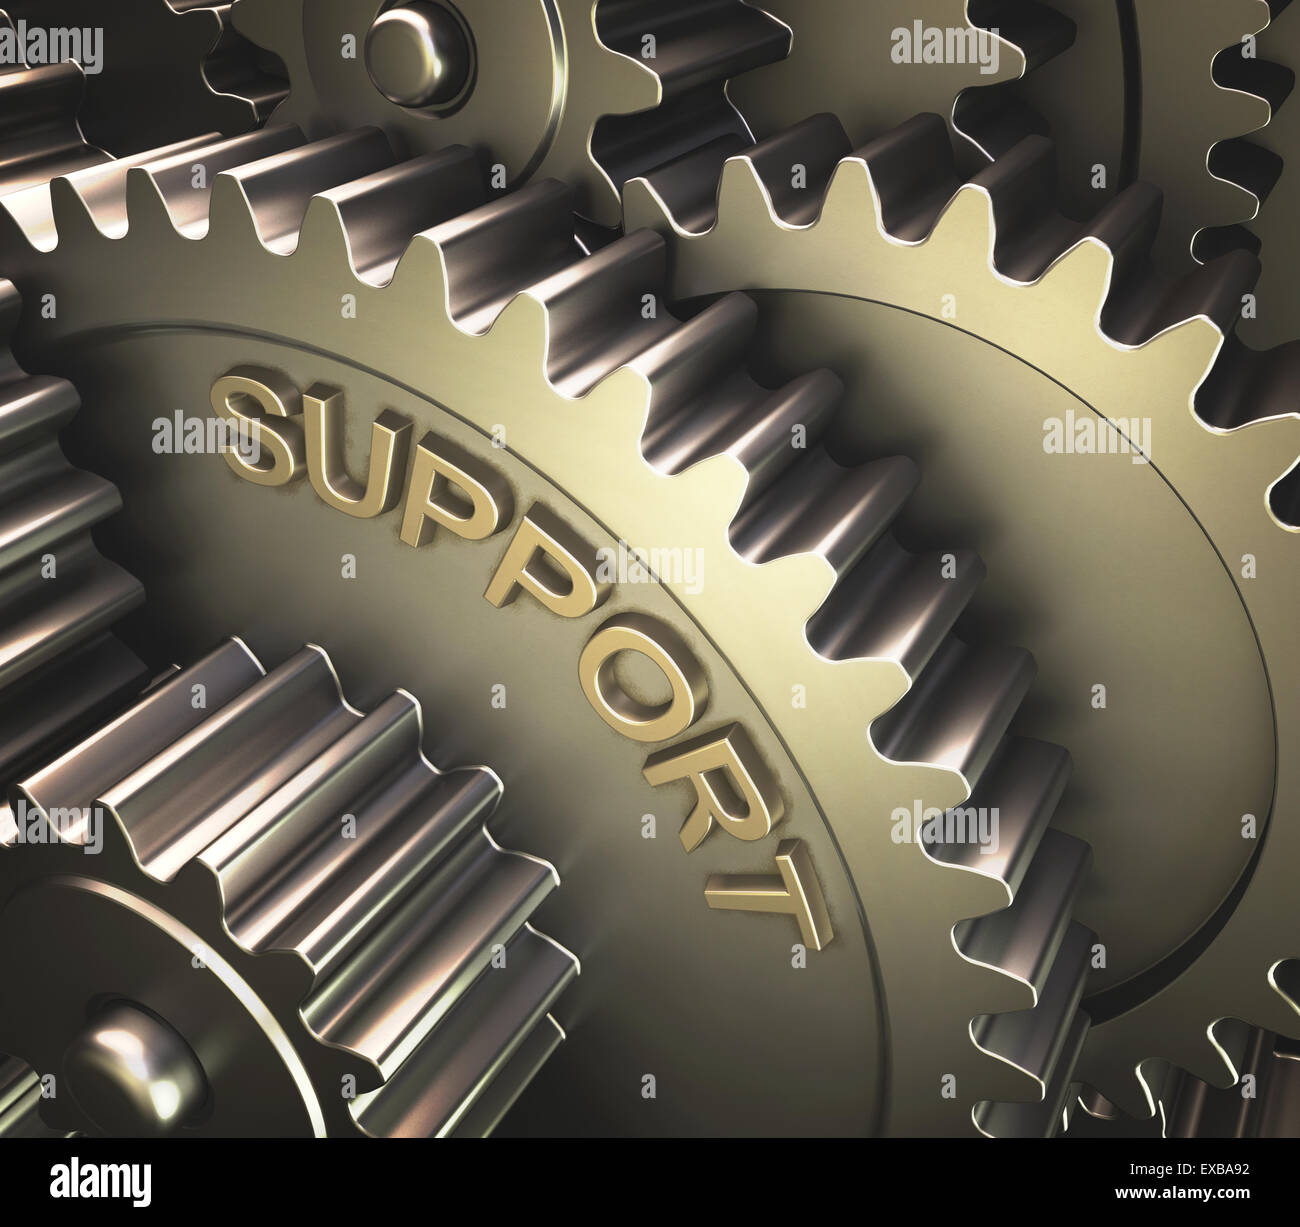 Set of gears with the word support printed on the side. Stock Photo